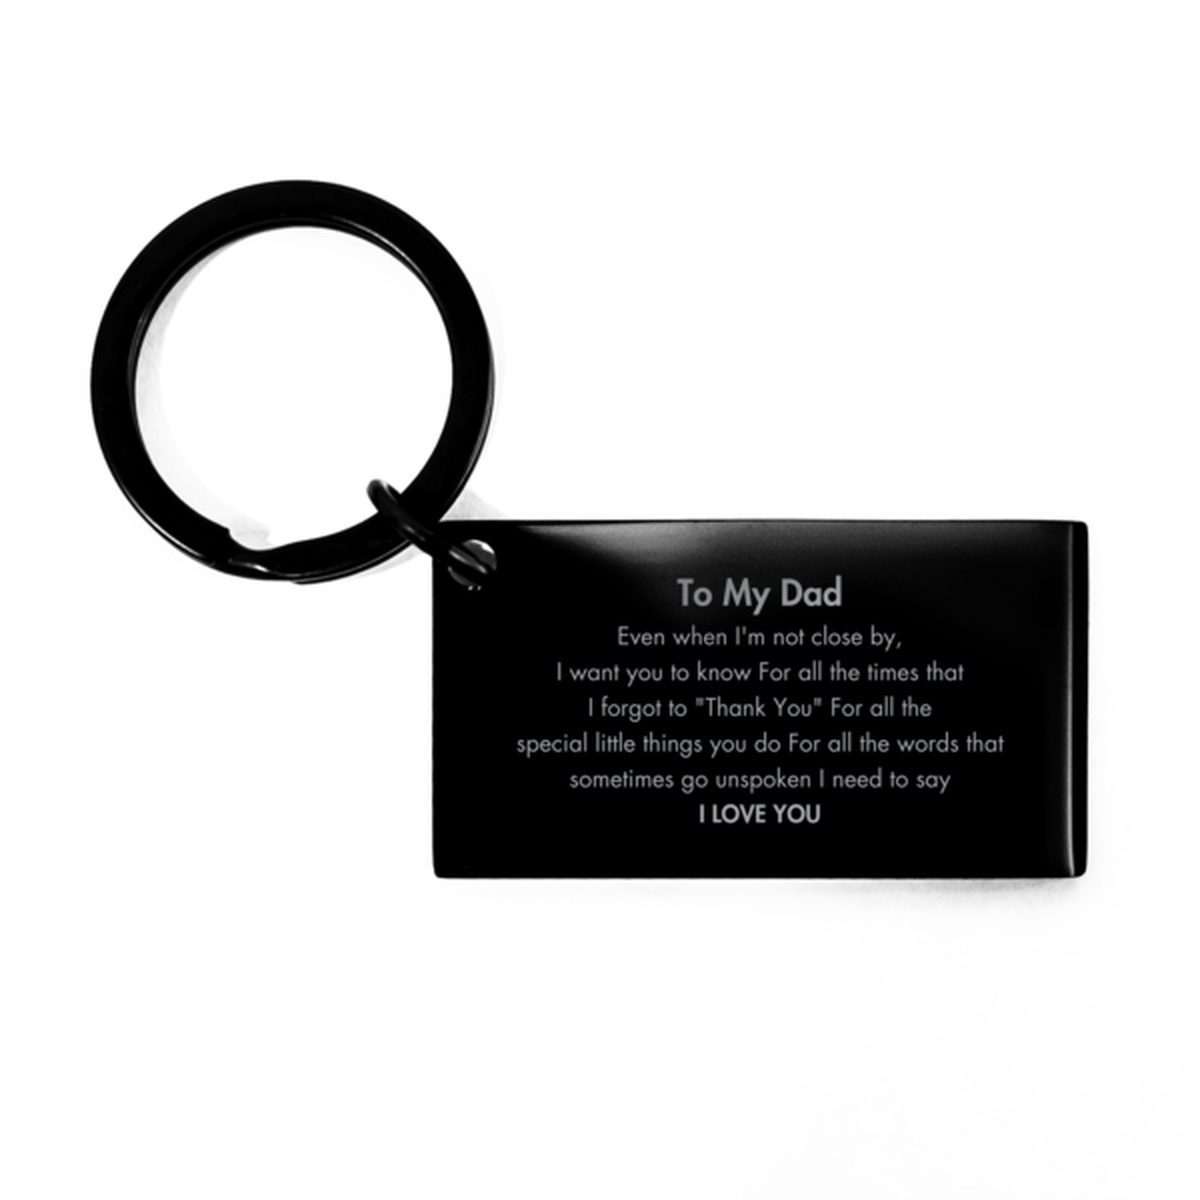 Thank You Gifts for Dad, Keepsake Keychain Gifts for Dad Birthday Mother's day Father's Day Dad For all the words That sometimes go unspoken I need to say I LOVE YOU